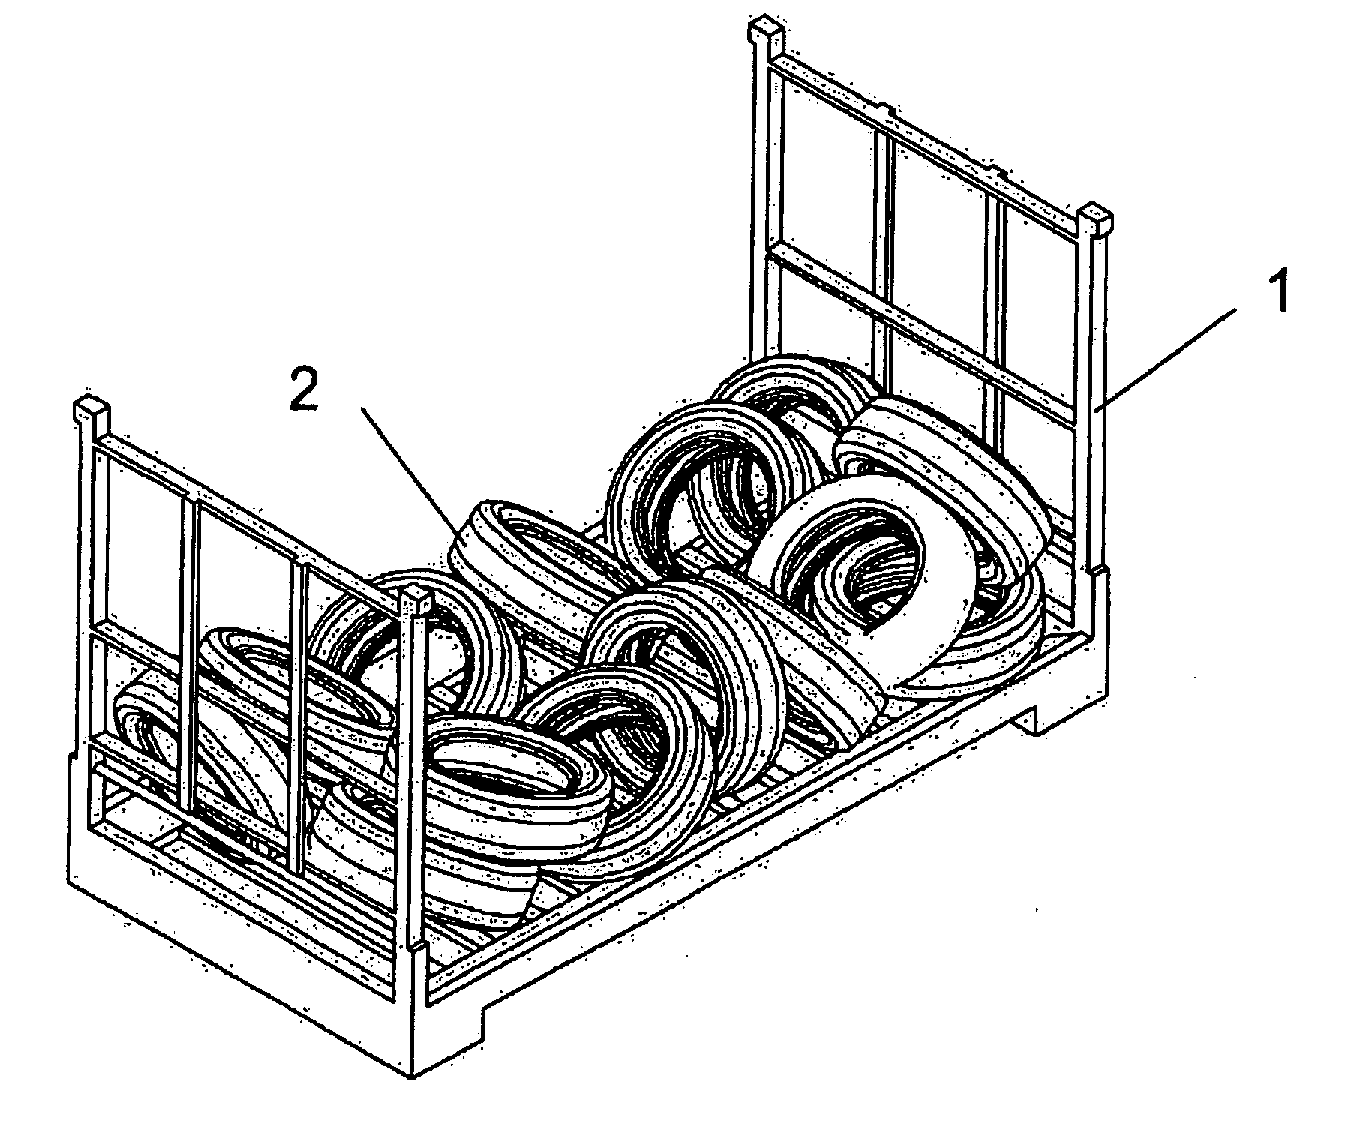 Method And System For Depalletizing Tires Using a Robot